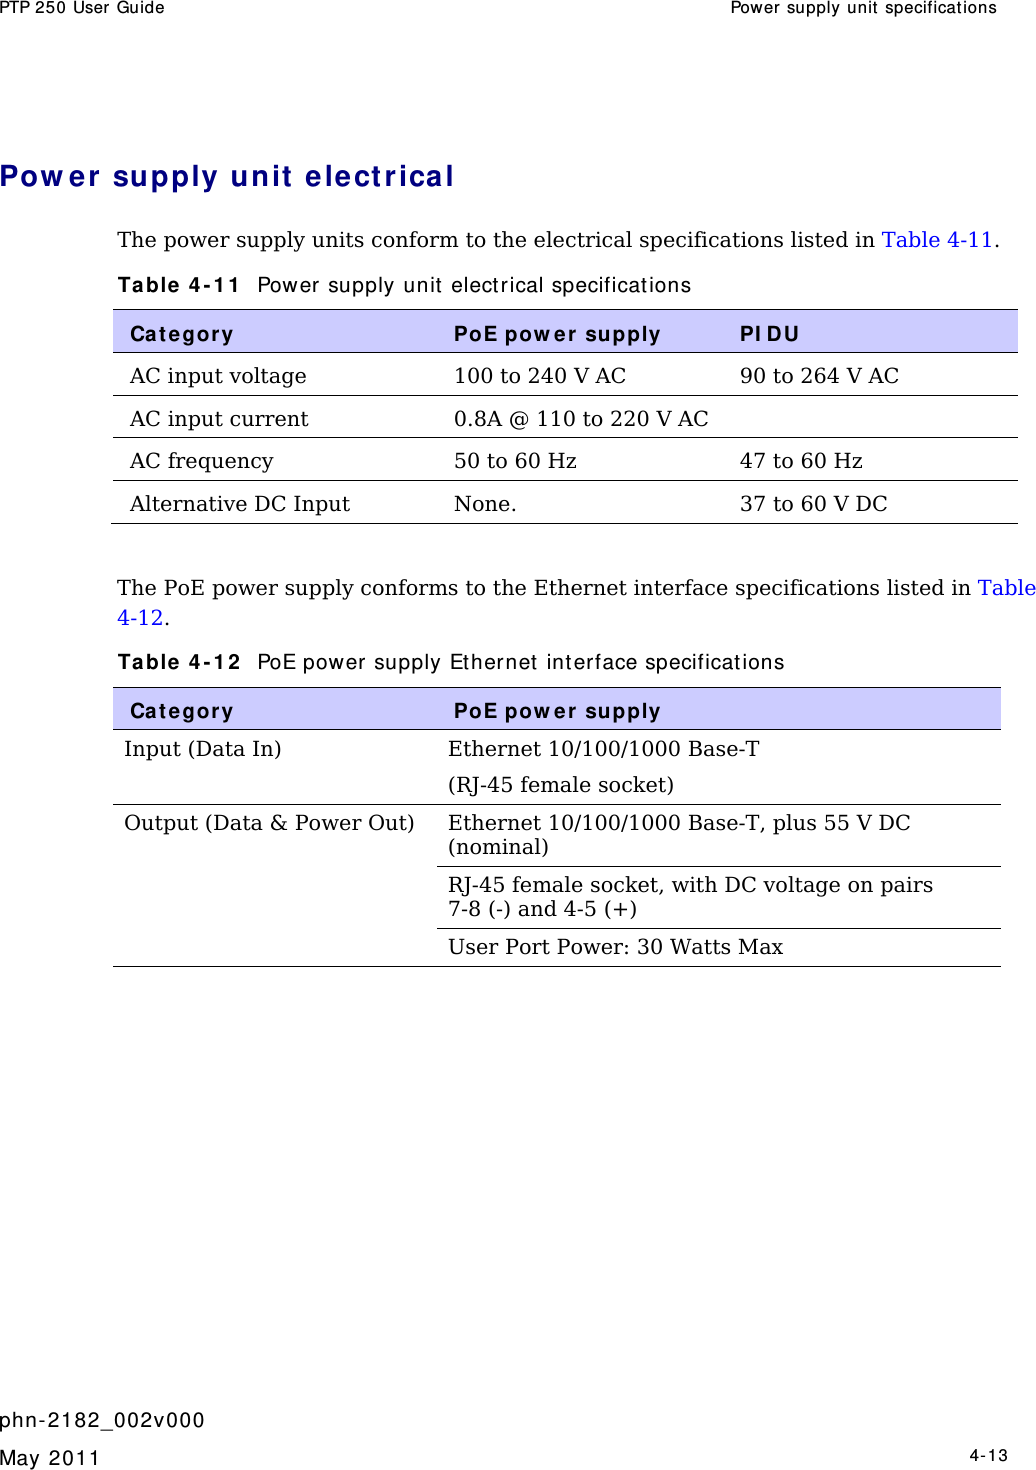 PTP 250 User Guide  Power supply unit  specificat ions   phn- 2182_002v000   May 2011   4-13  Pow e r  supply unit  electrical The power supply units conform to the electrical specifications listed in Table 4-11. Table  4 - 1 1   Power supply unit elect rical specifications Cat e gor y  PoE pow er  supply  PI D U AC input voltage  100 to 240 V AC  90 to 264 V AC AC input current  0.8A @ 110 to 220 V AC   AC frequency  50 to 60 Hz  47 to 60 Hz Alternative DC Input  None.  37 to 60 V DC  The PoE power supply conforms to the Ethernet interface specifications listed in Table 4-12. Table  4 - 1 2   PoE power supply Ethernet  int erface specificat ions Cat e gor y  PoE pow er  supply Input (Data In)  Ethernet 10/100/1000 Base-T (RJ-45 female socket) Output (Data &amp; Power Out)  Ethernet 10/100/1000 Base-T, plus 55 V DC (nominal) RJ-45 female socket, with DC voltage on pairs 7-8 (-) and 4-5 (+) User Port Power: 30 Watts Max   